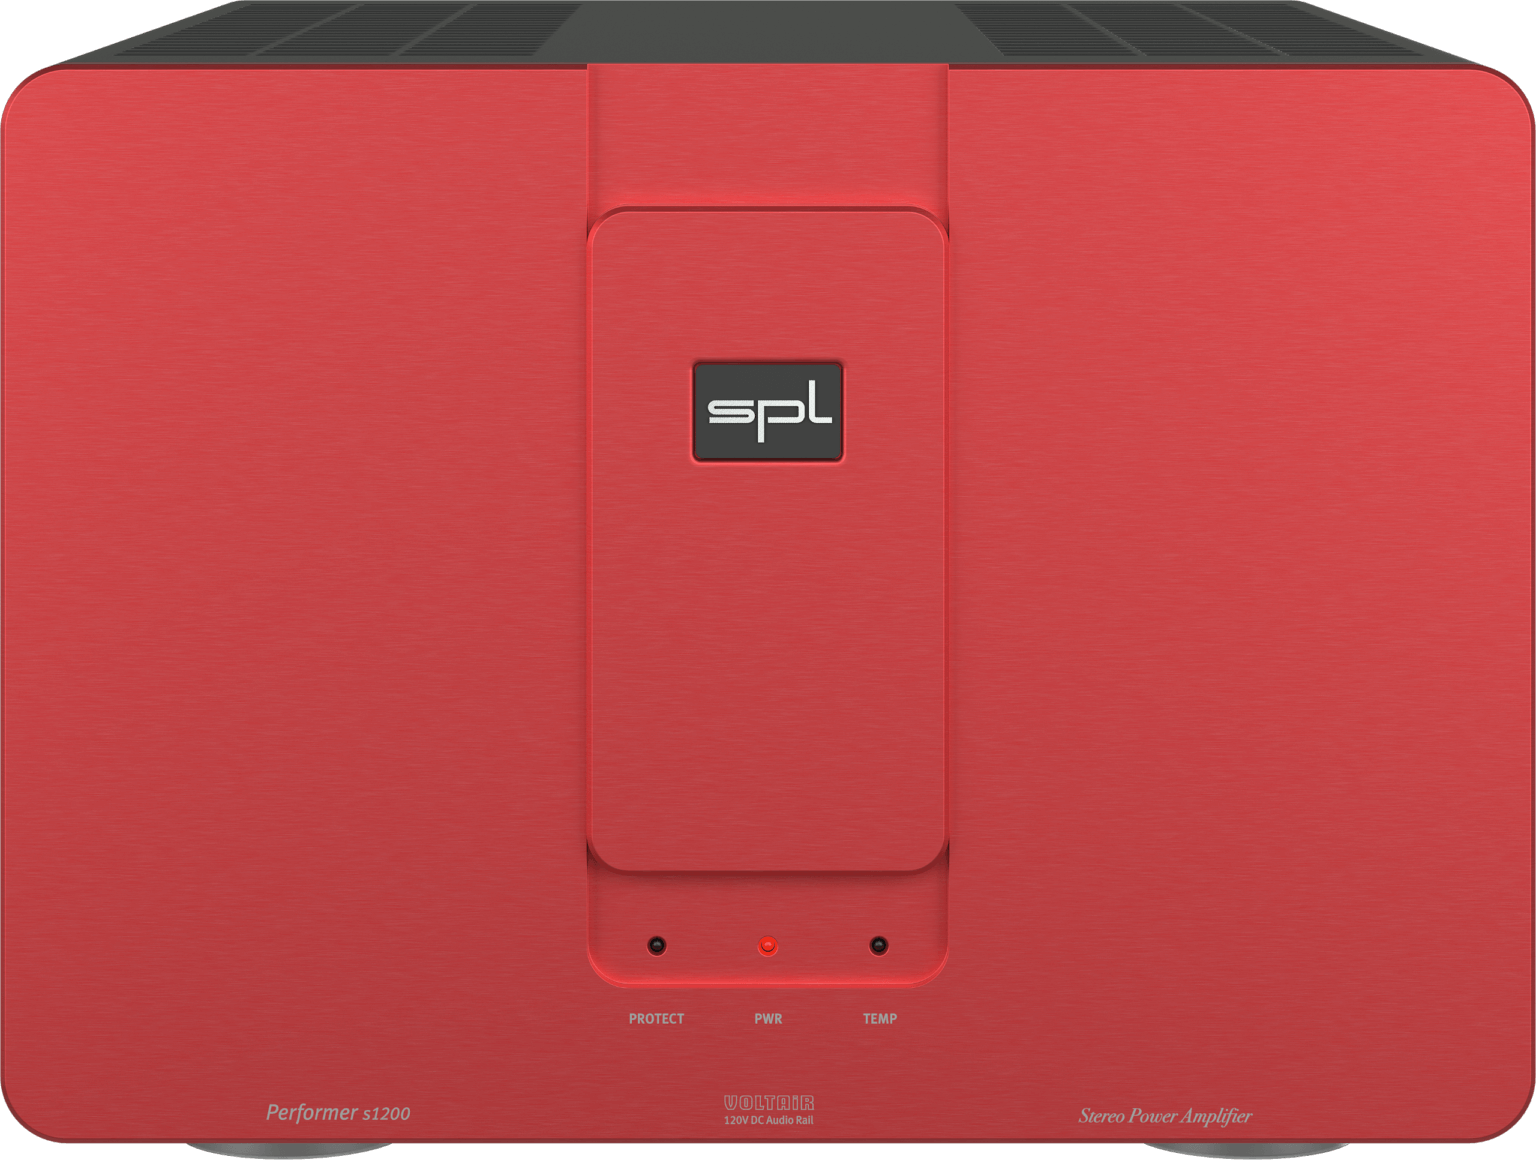 SPL Performer s1200 - The Powerful Stereo Amplifier